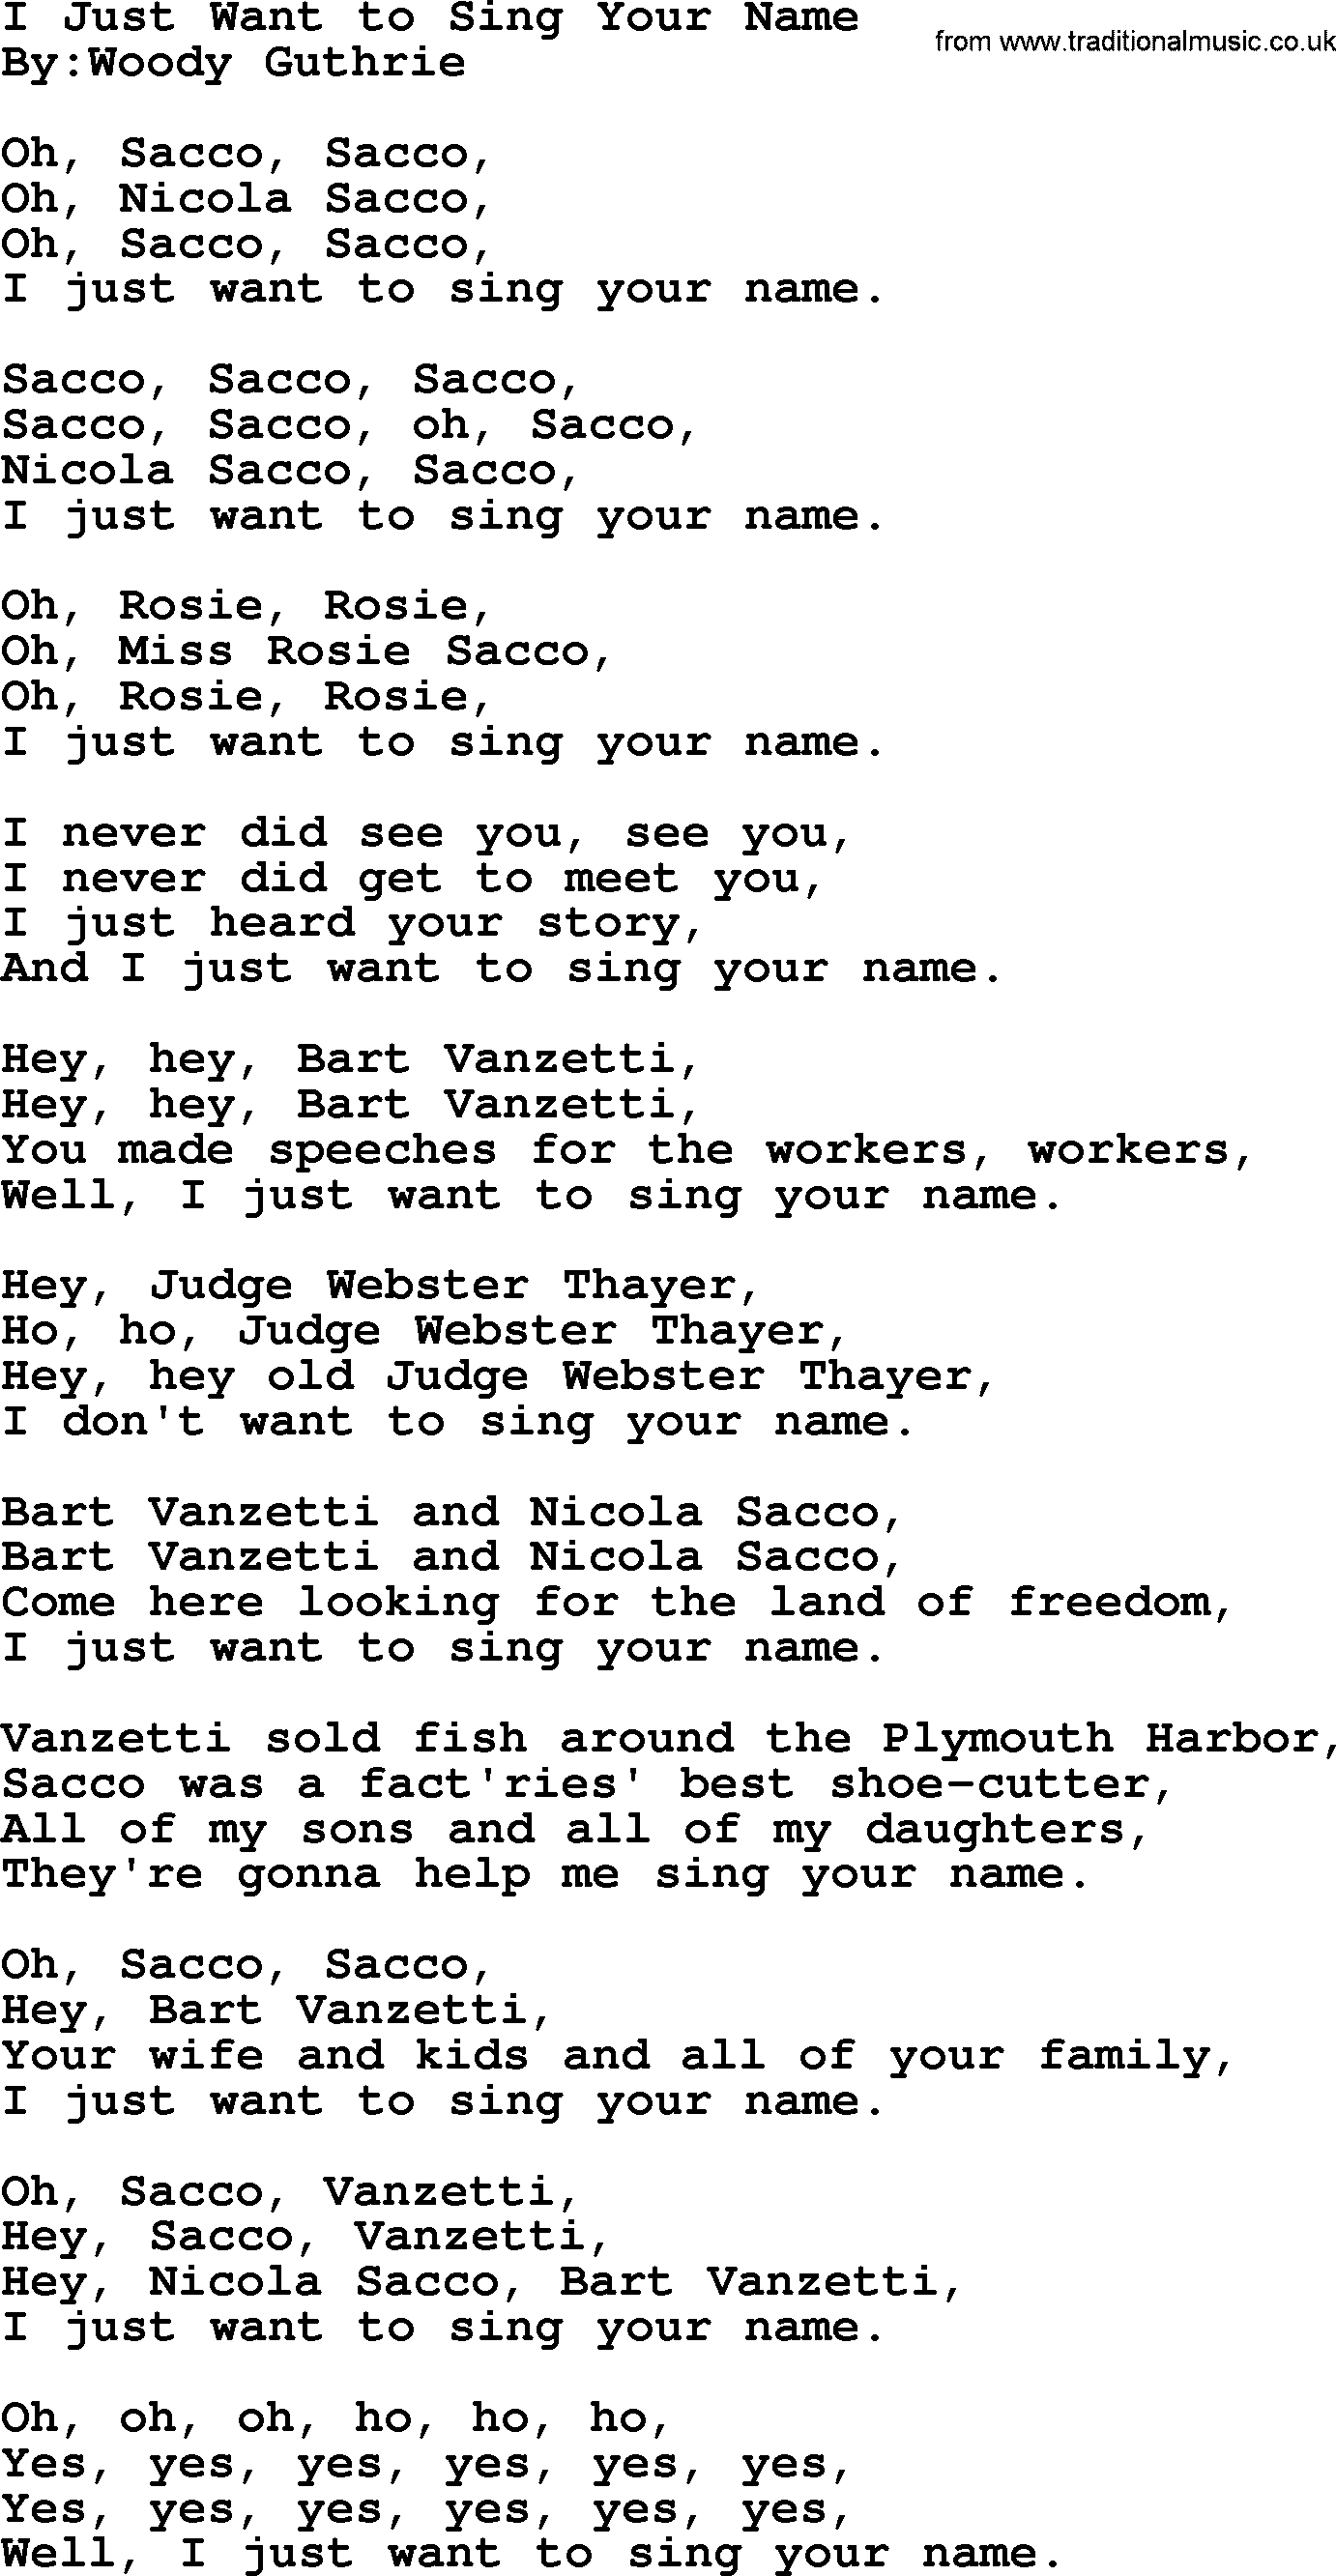 Political, Solidarity, Workers or Union song: I Just Want To Sing Your Name, lyrics